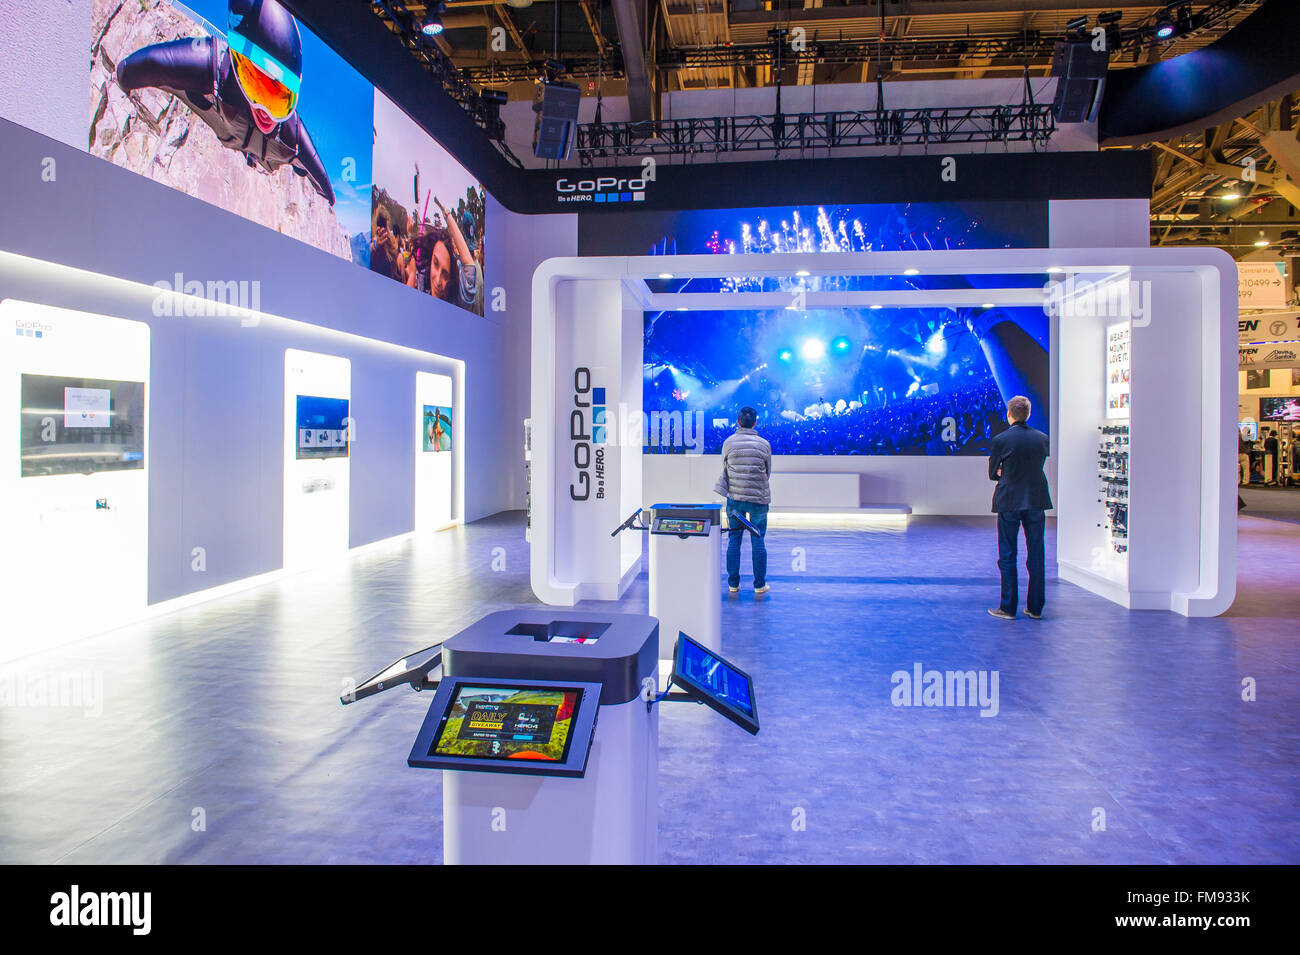 The GoPro booth at the CES show in Las Vegas Stock Photo - Alamy